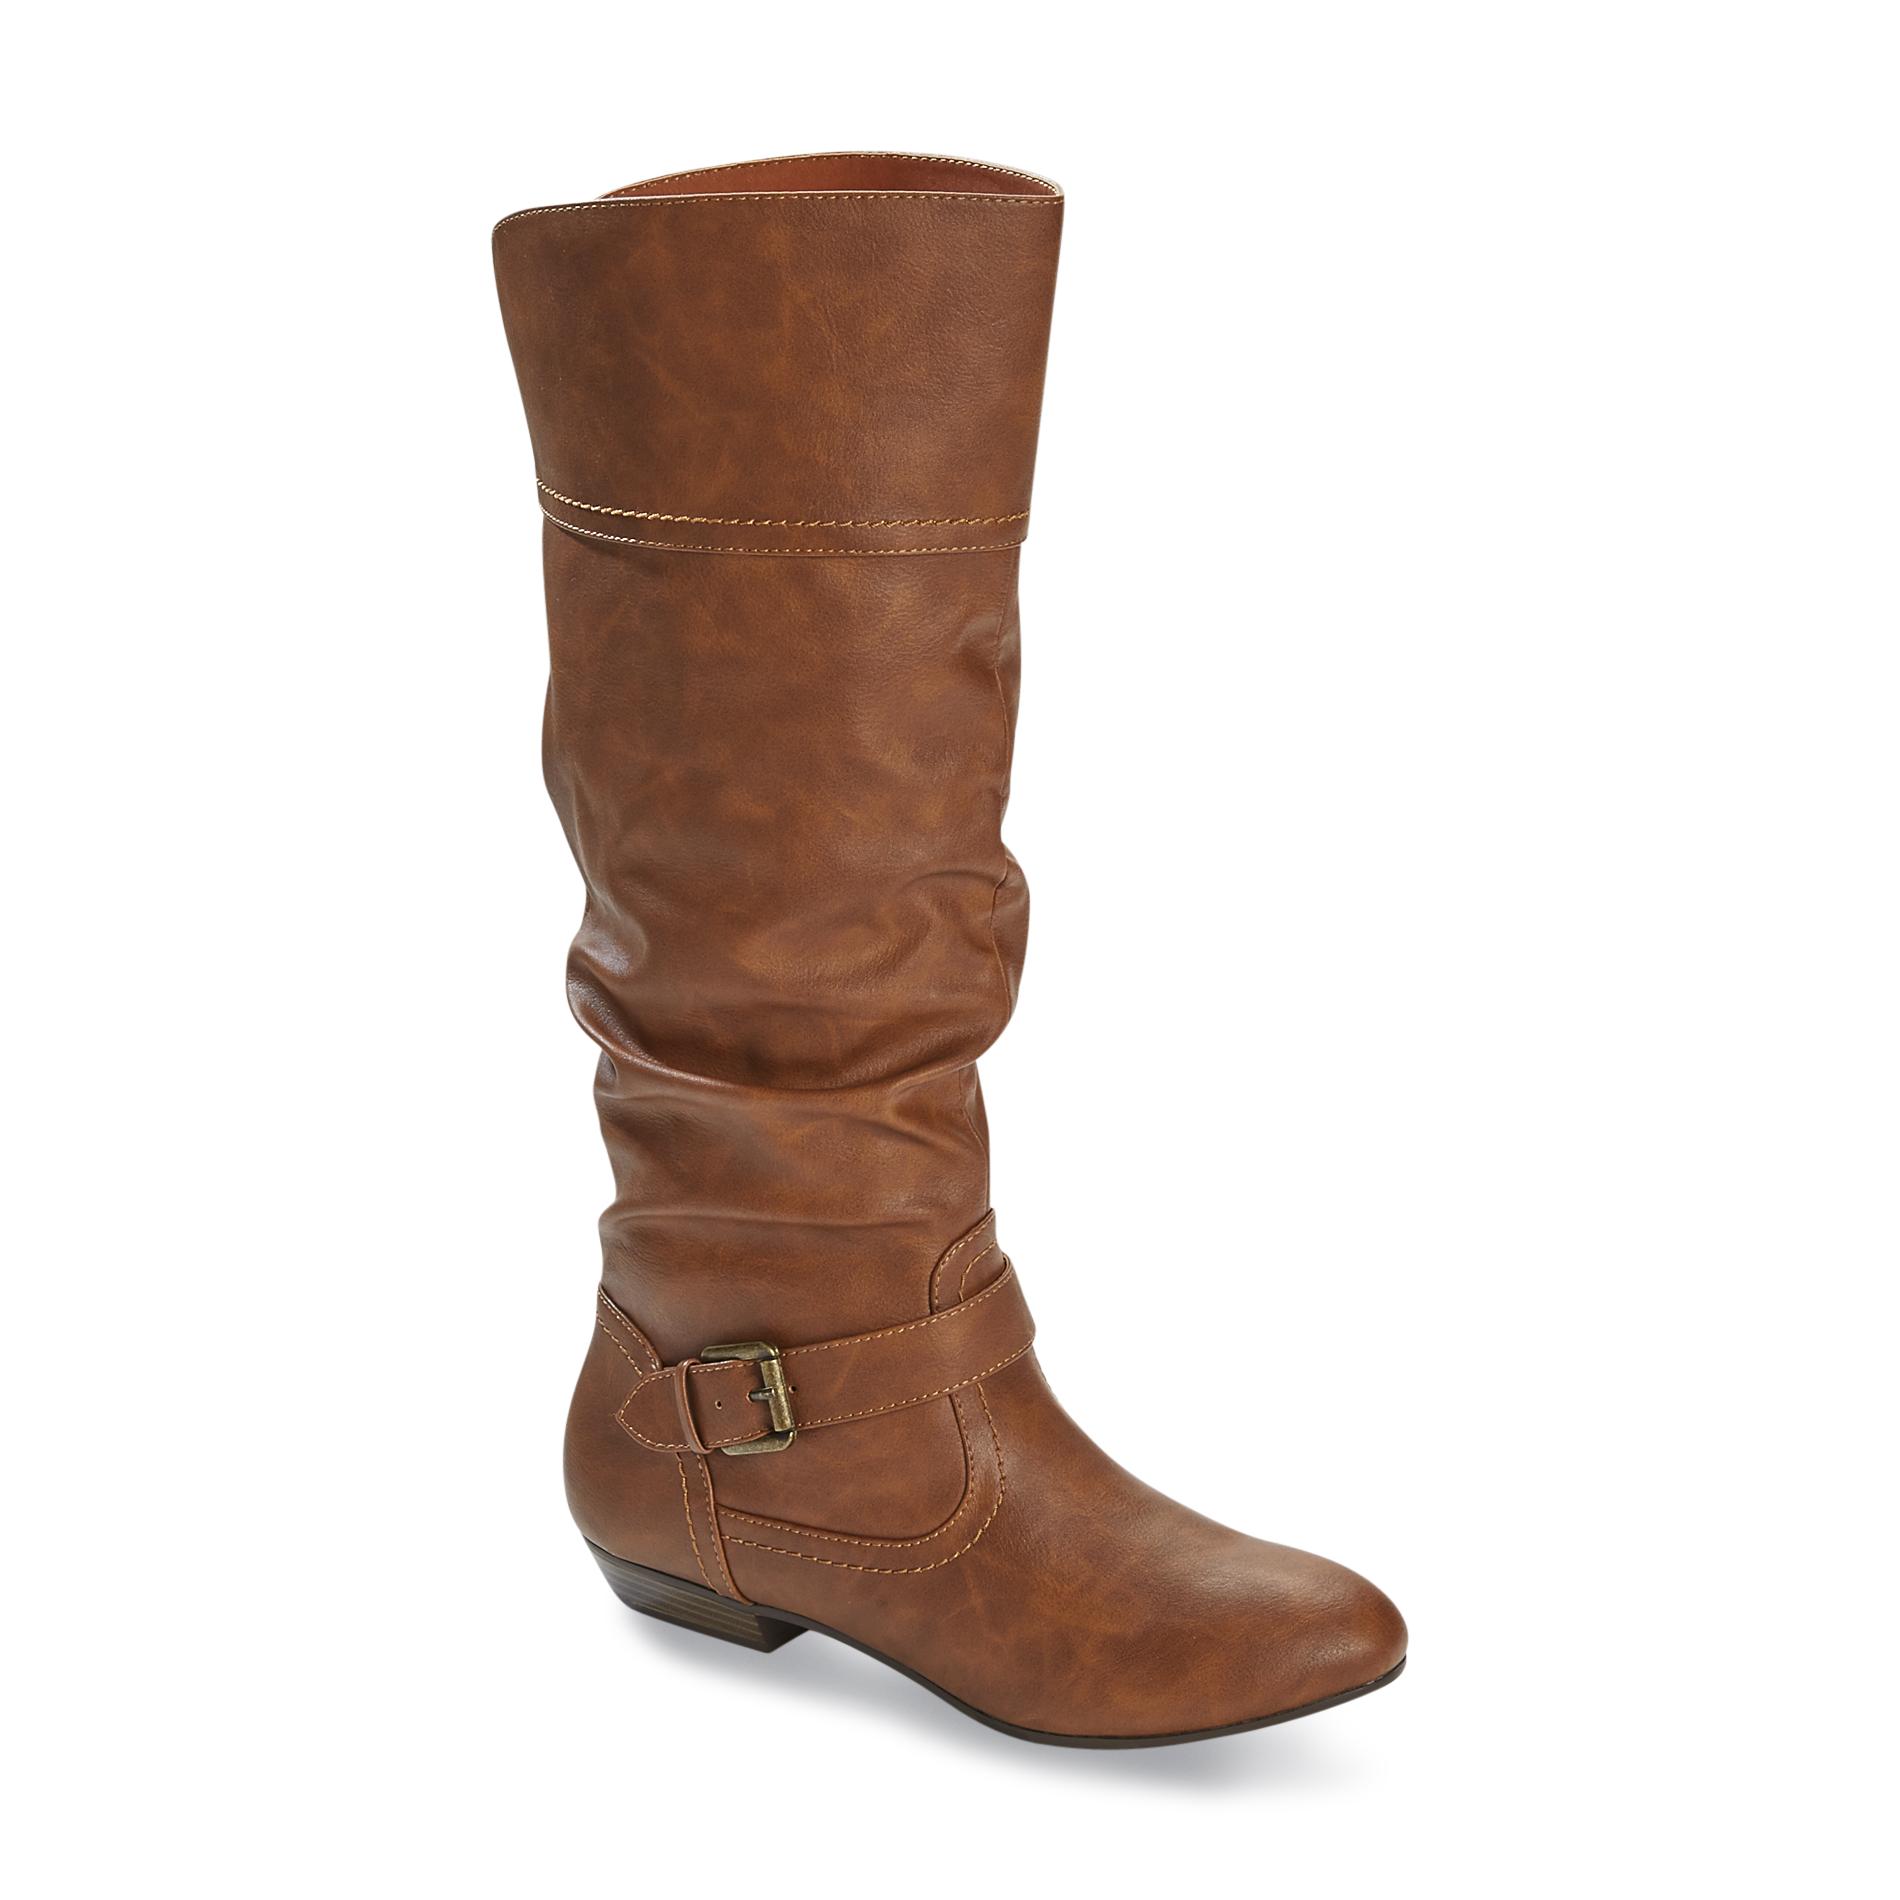 Propet Women's Embry 14 1/2" Brown Synthetic Riding Boot